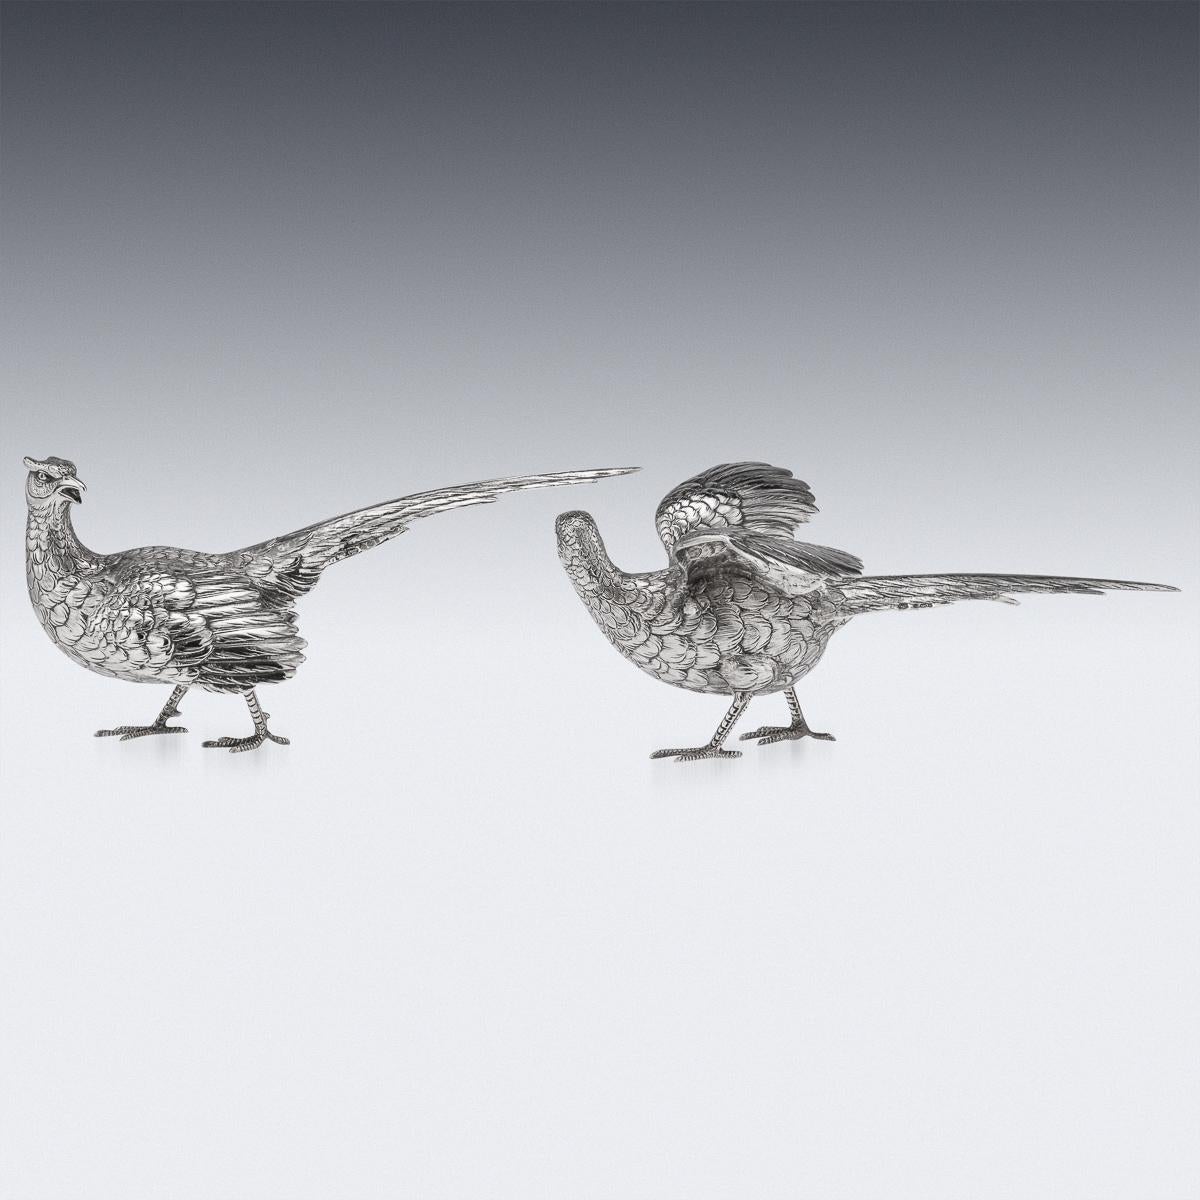 20th century pair of silver table ornaments modelled as a male and female pheasants, each statue is naturalistic and well-refined, perfect to use as a table or fireplace ornament, the heads are set turned and one with raised wings. Hallmarked